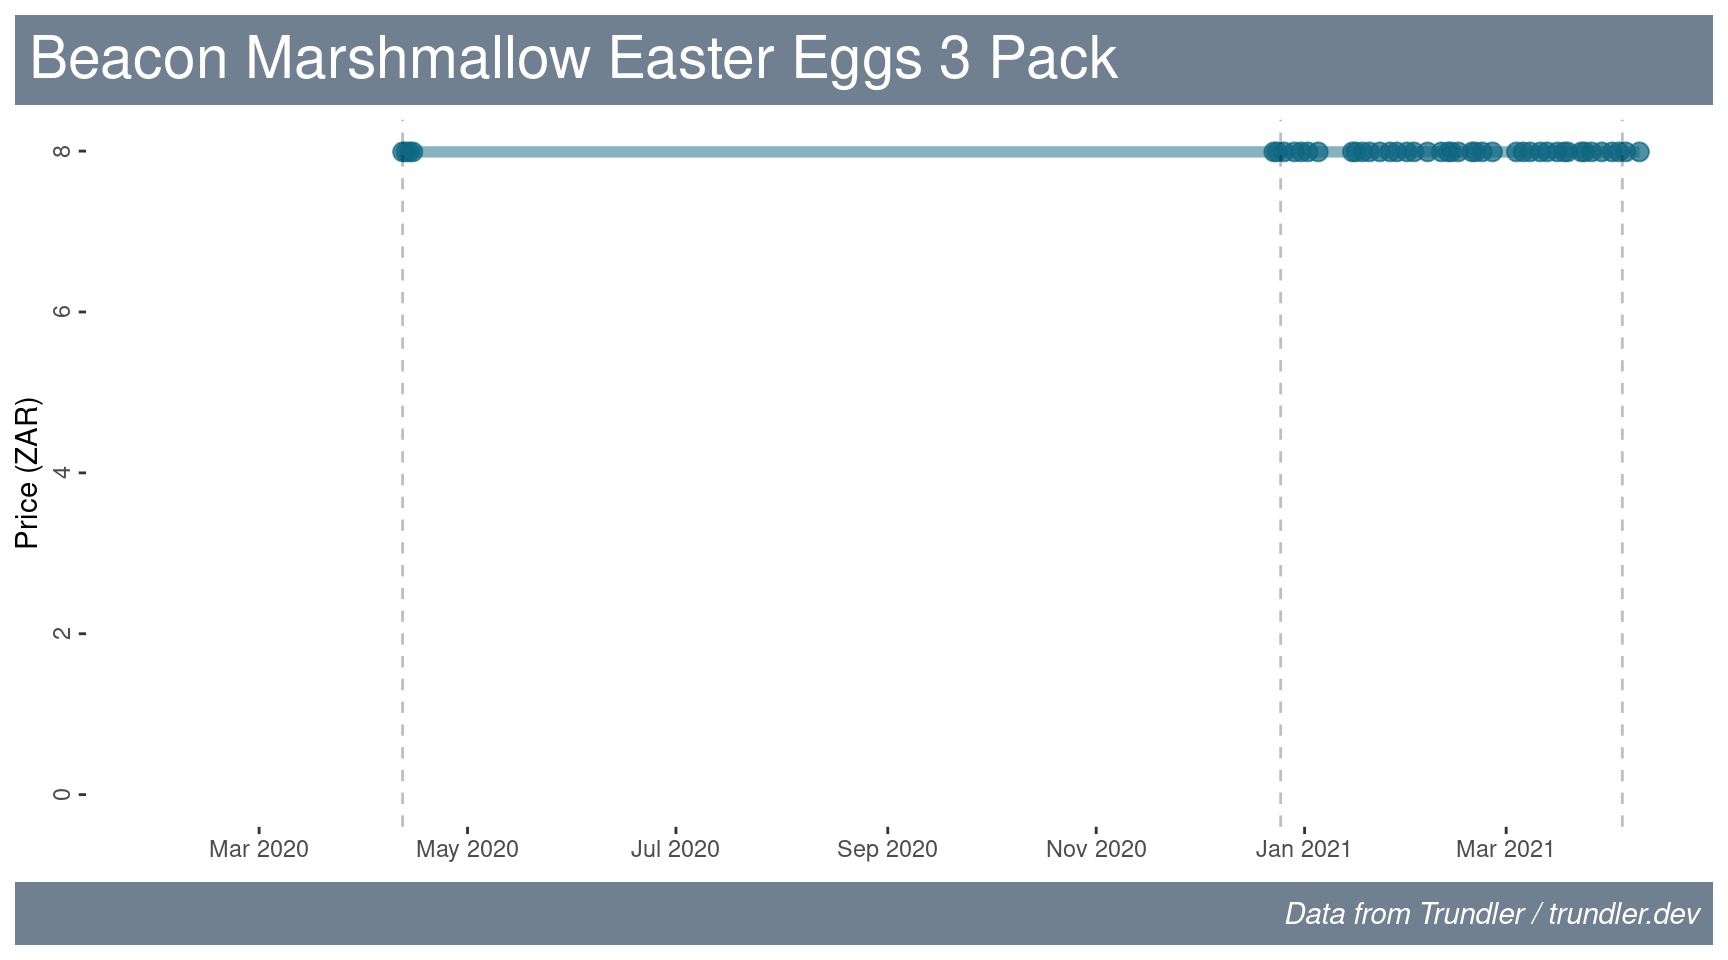 Price history for Beacon Marshmallow Easter Eggs.